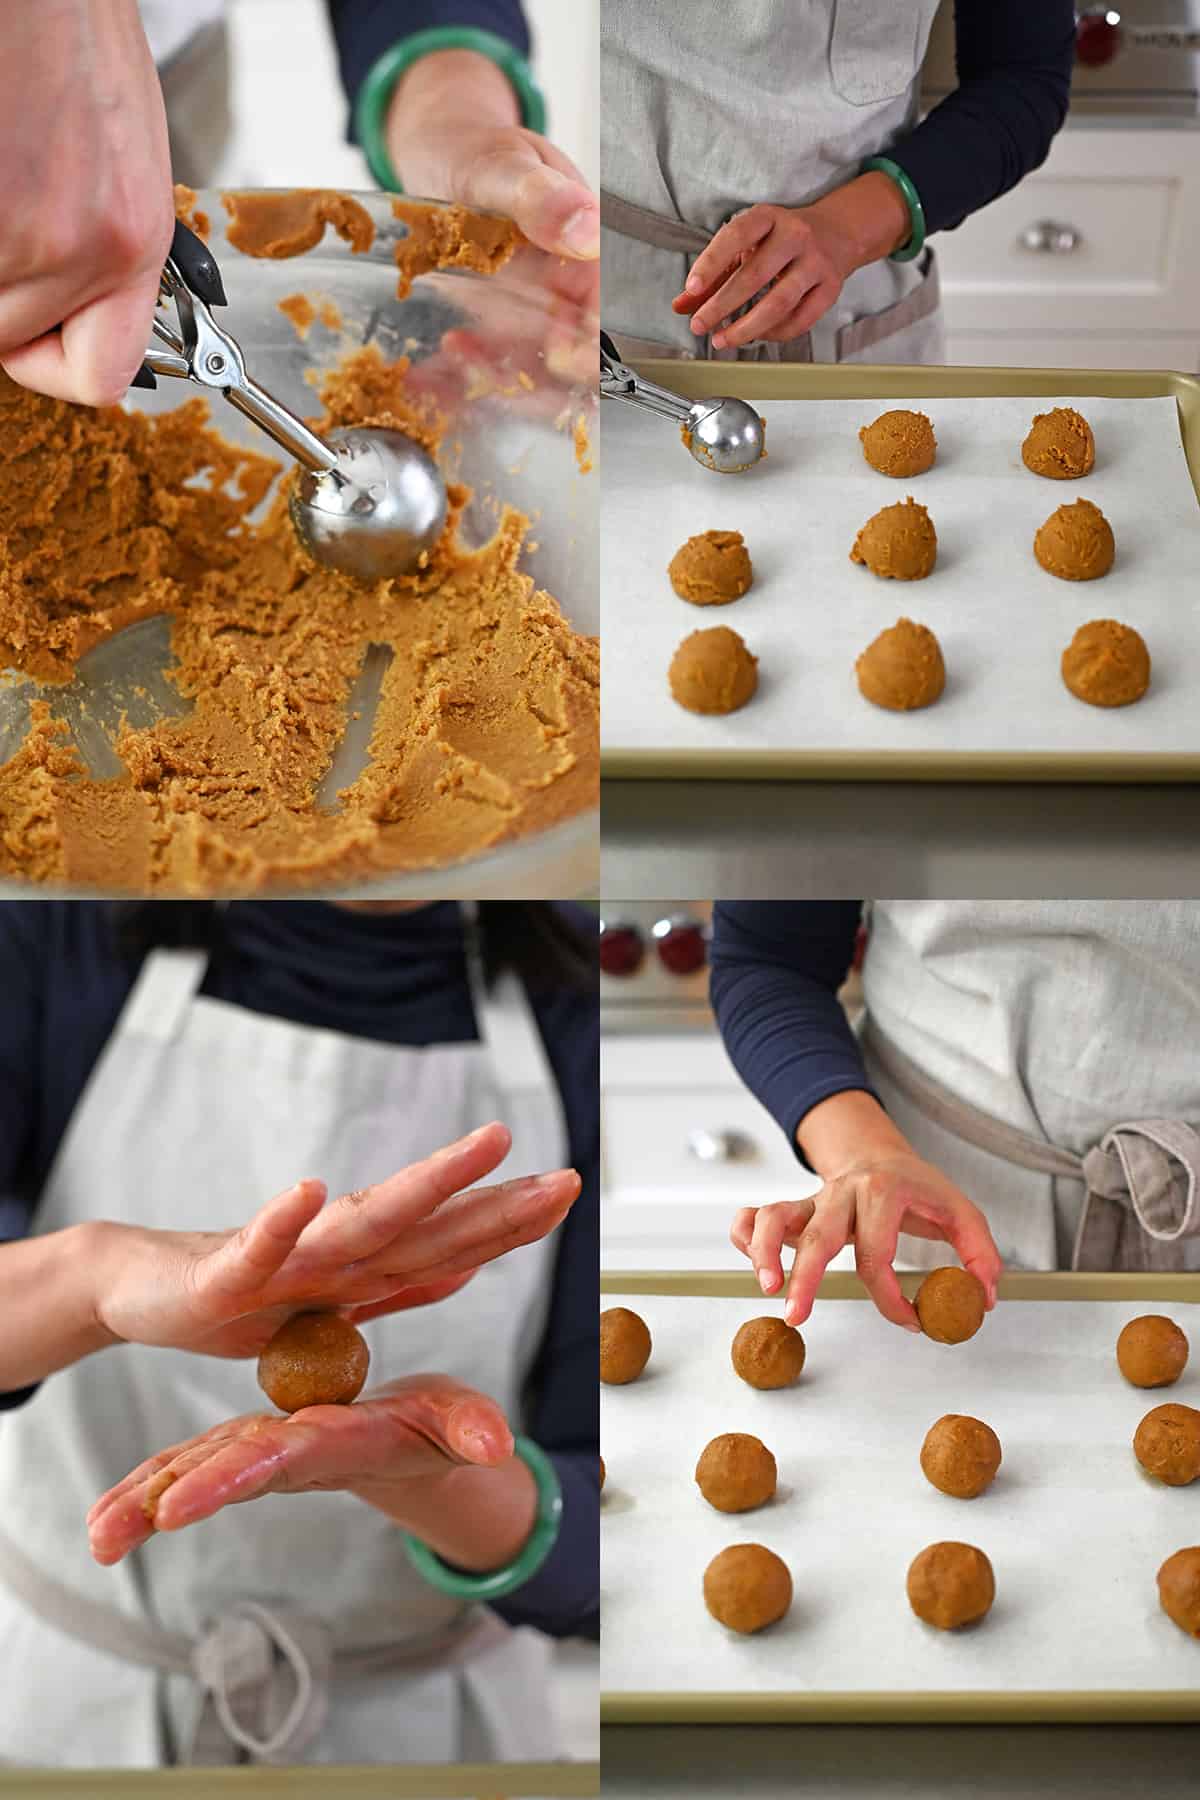 Four sequential photos that show someone scooping pumpkin cookie dough with an ice cream scoop, rolling the dough balls into balls, and placing them on the parchment lined rimmed baking sheets.